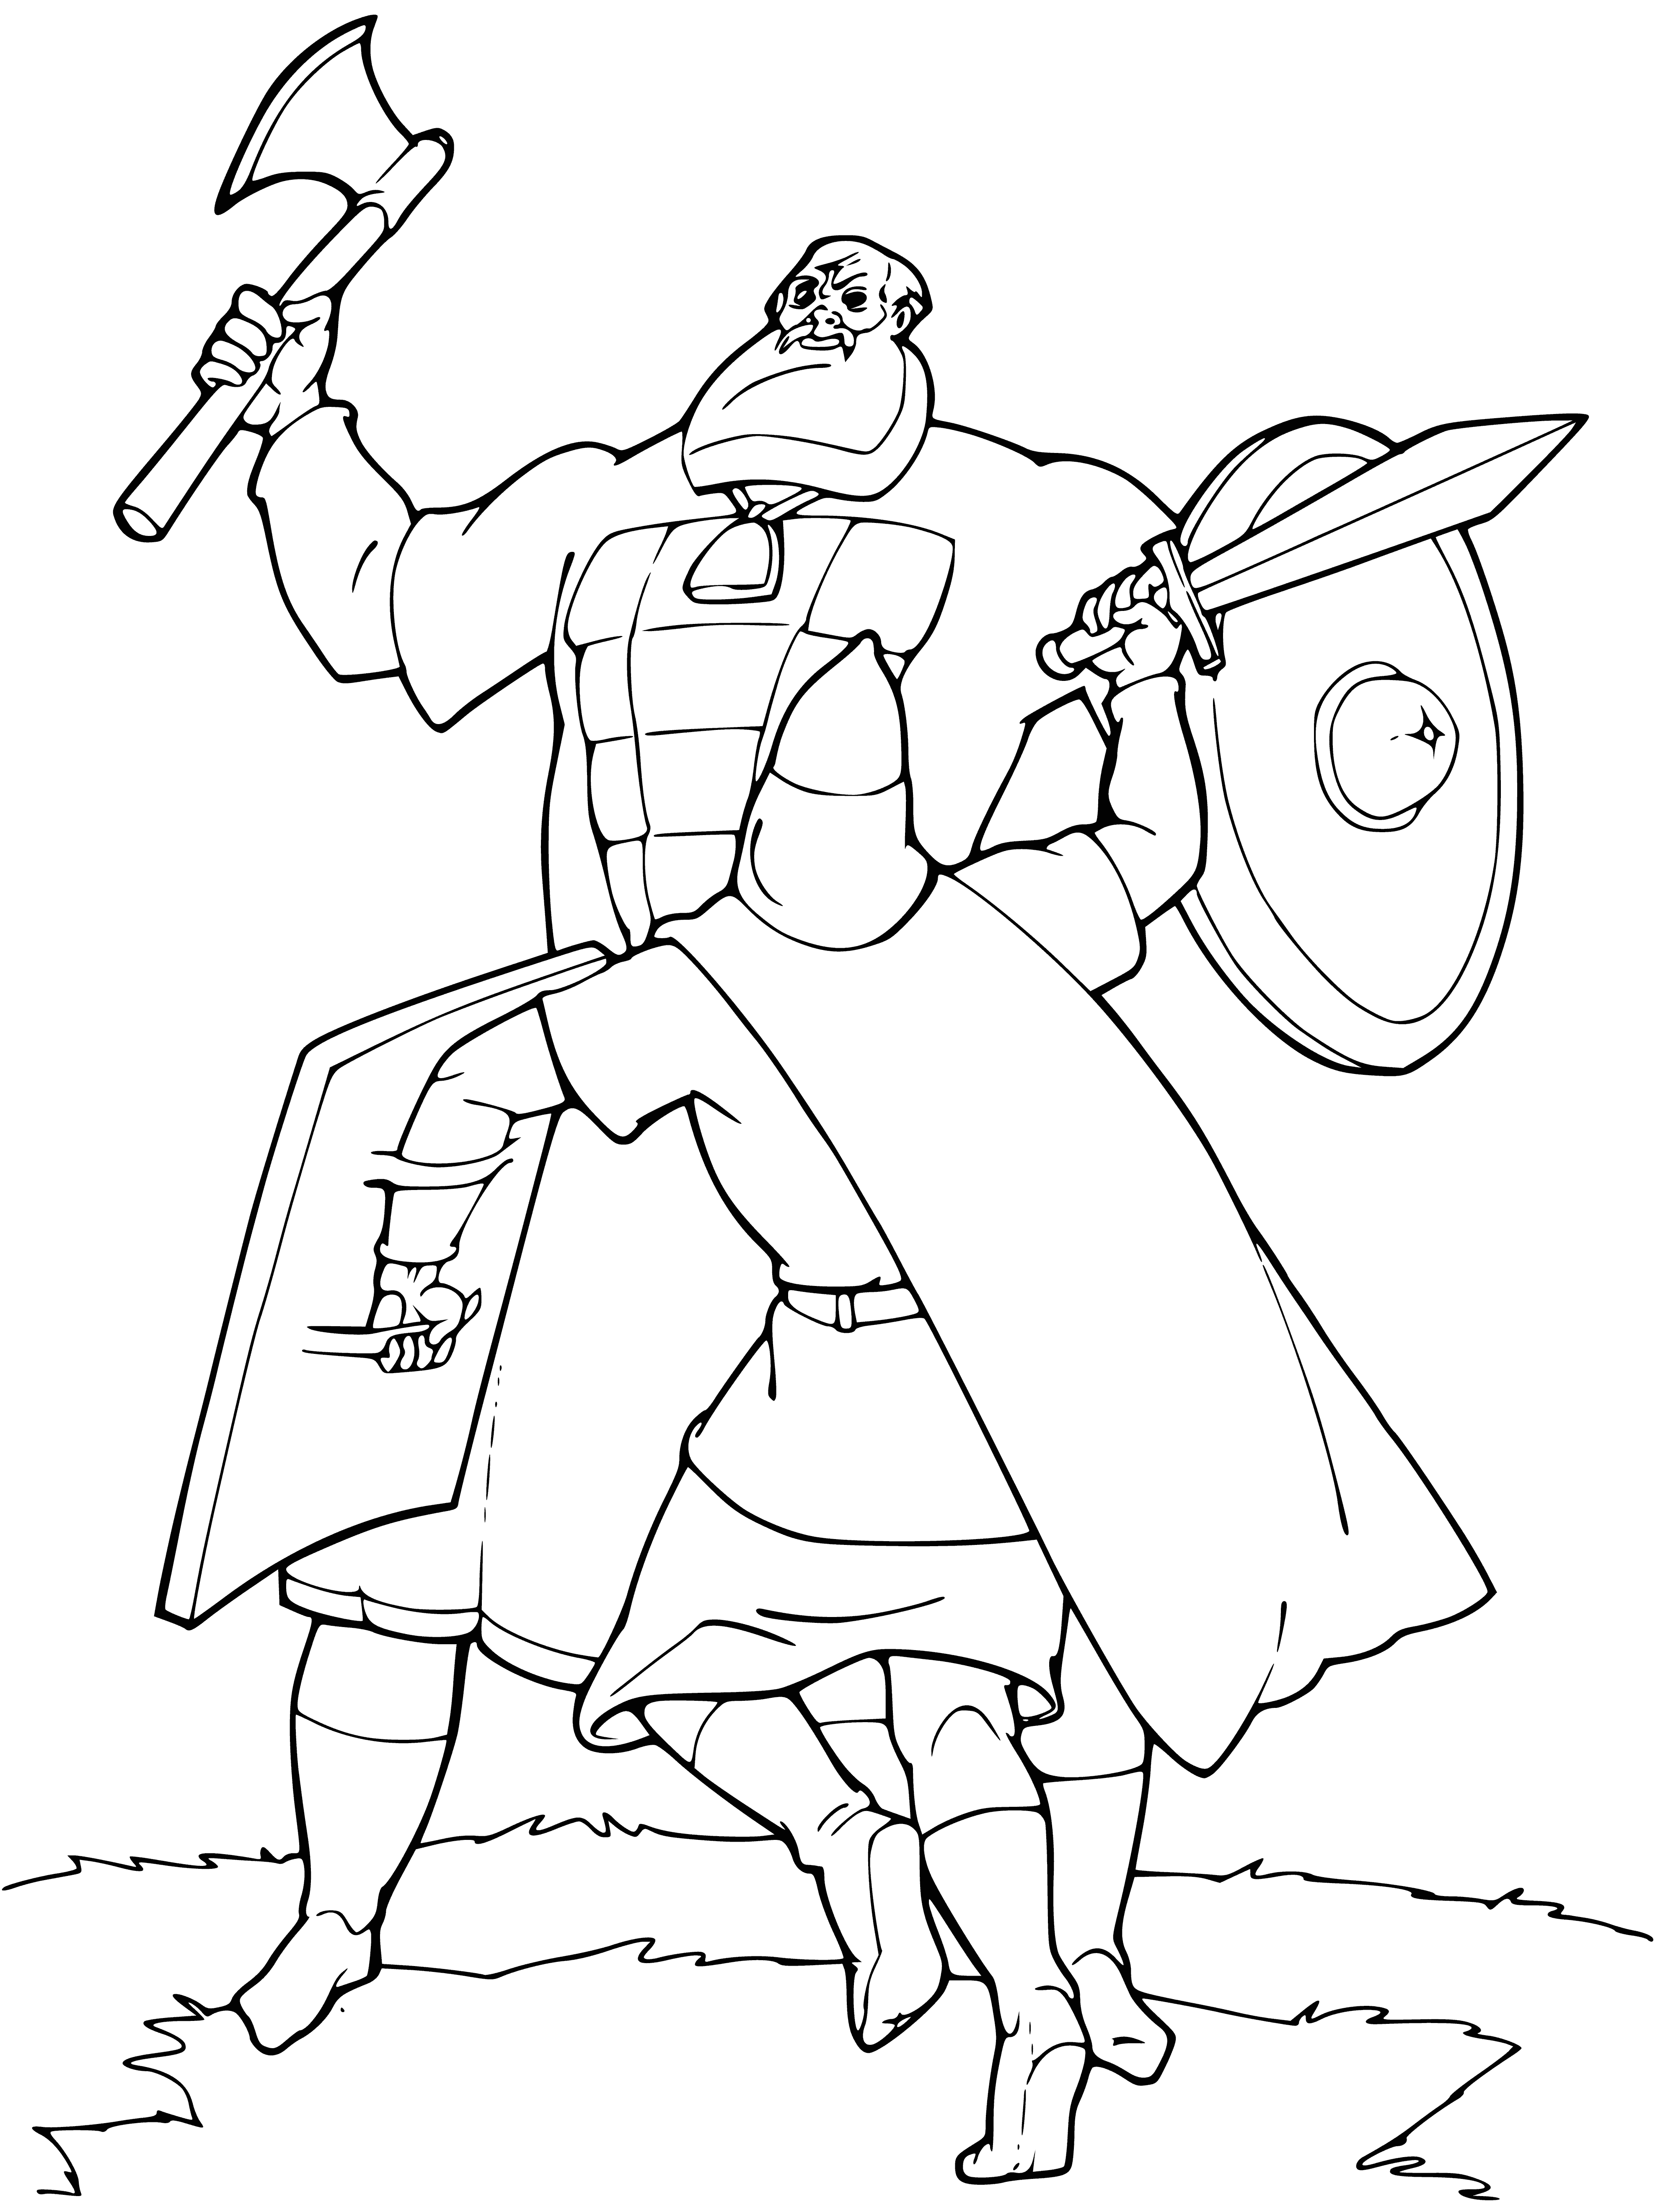 coloring page: A man, presumably Prince Vladimir, stands with sword in hand, shield on back surrounded by soldiers ready for battle. In the bg a city & cathedral.